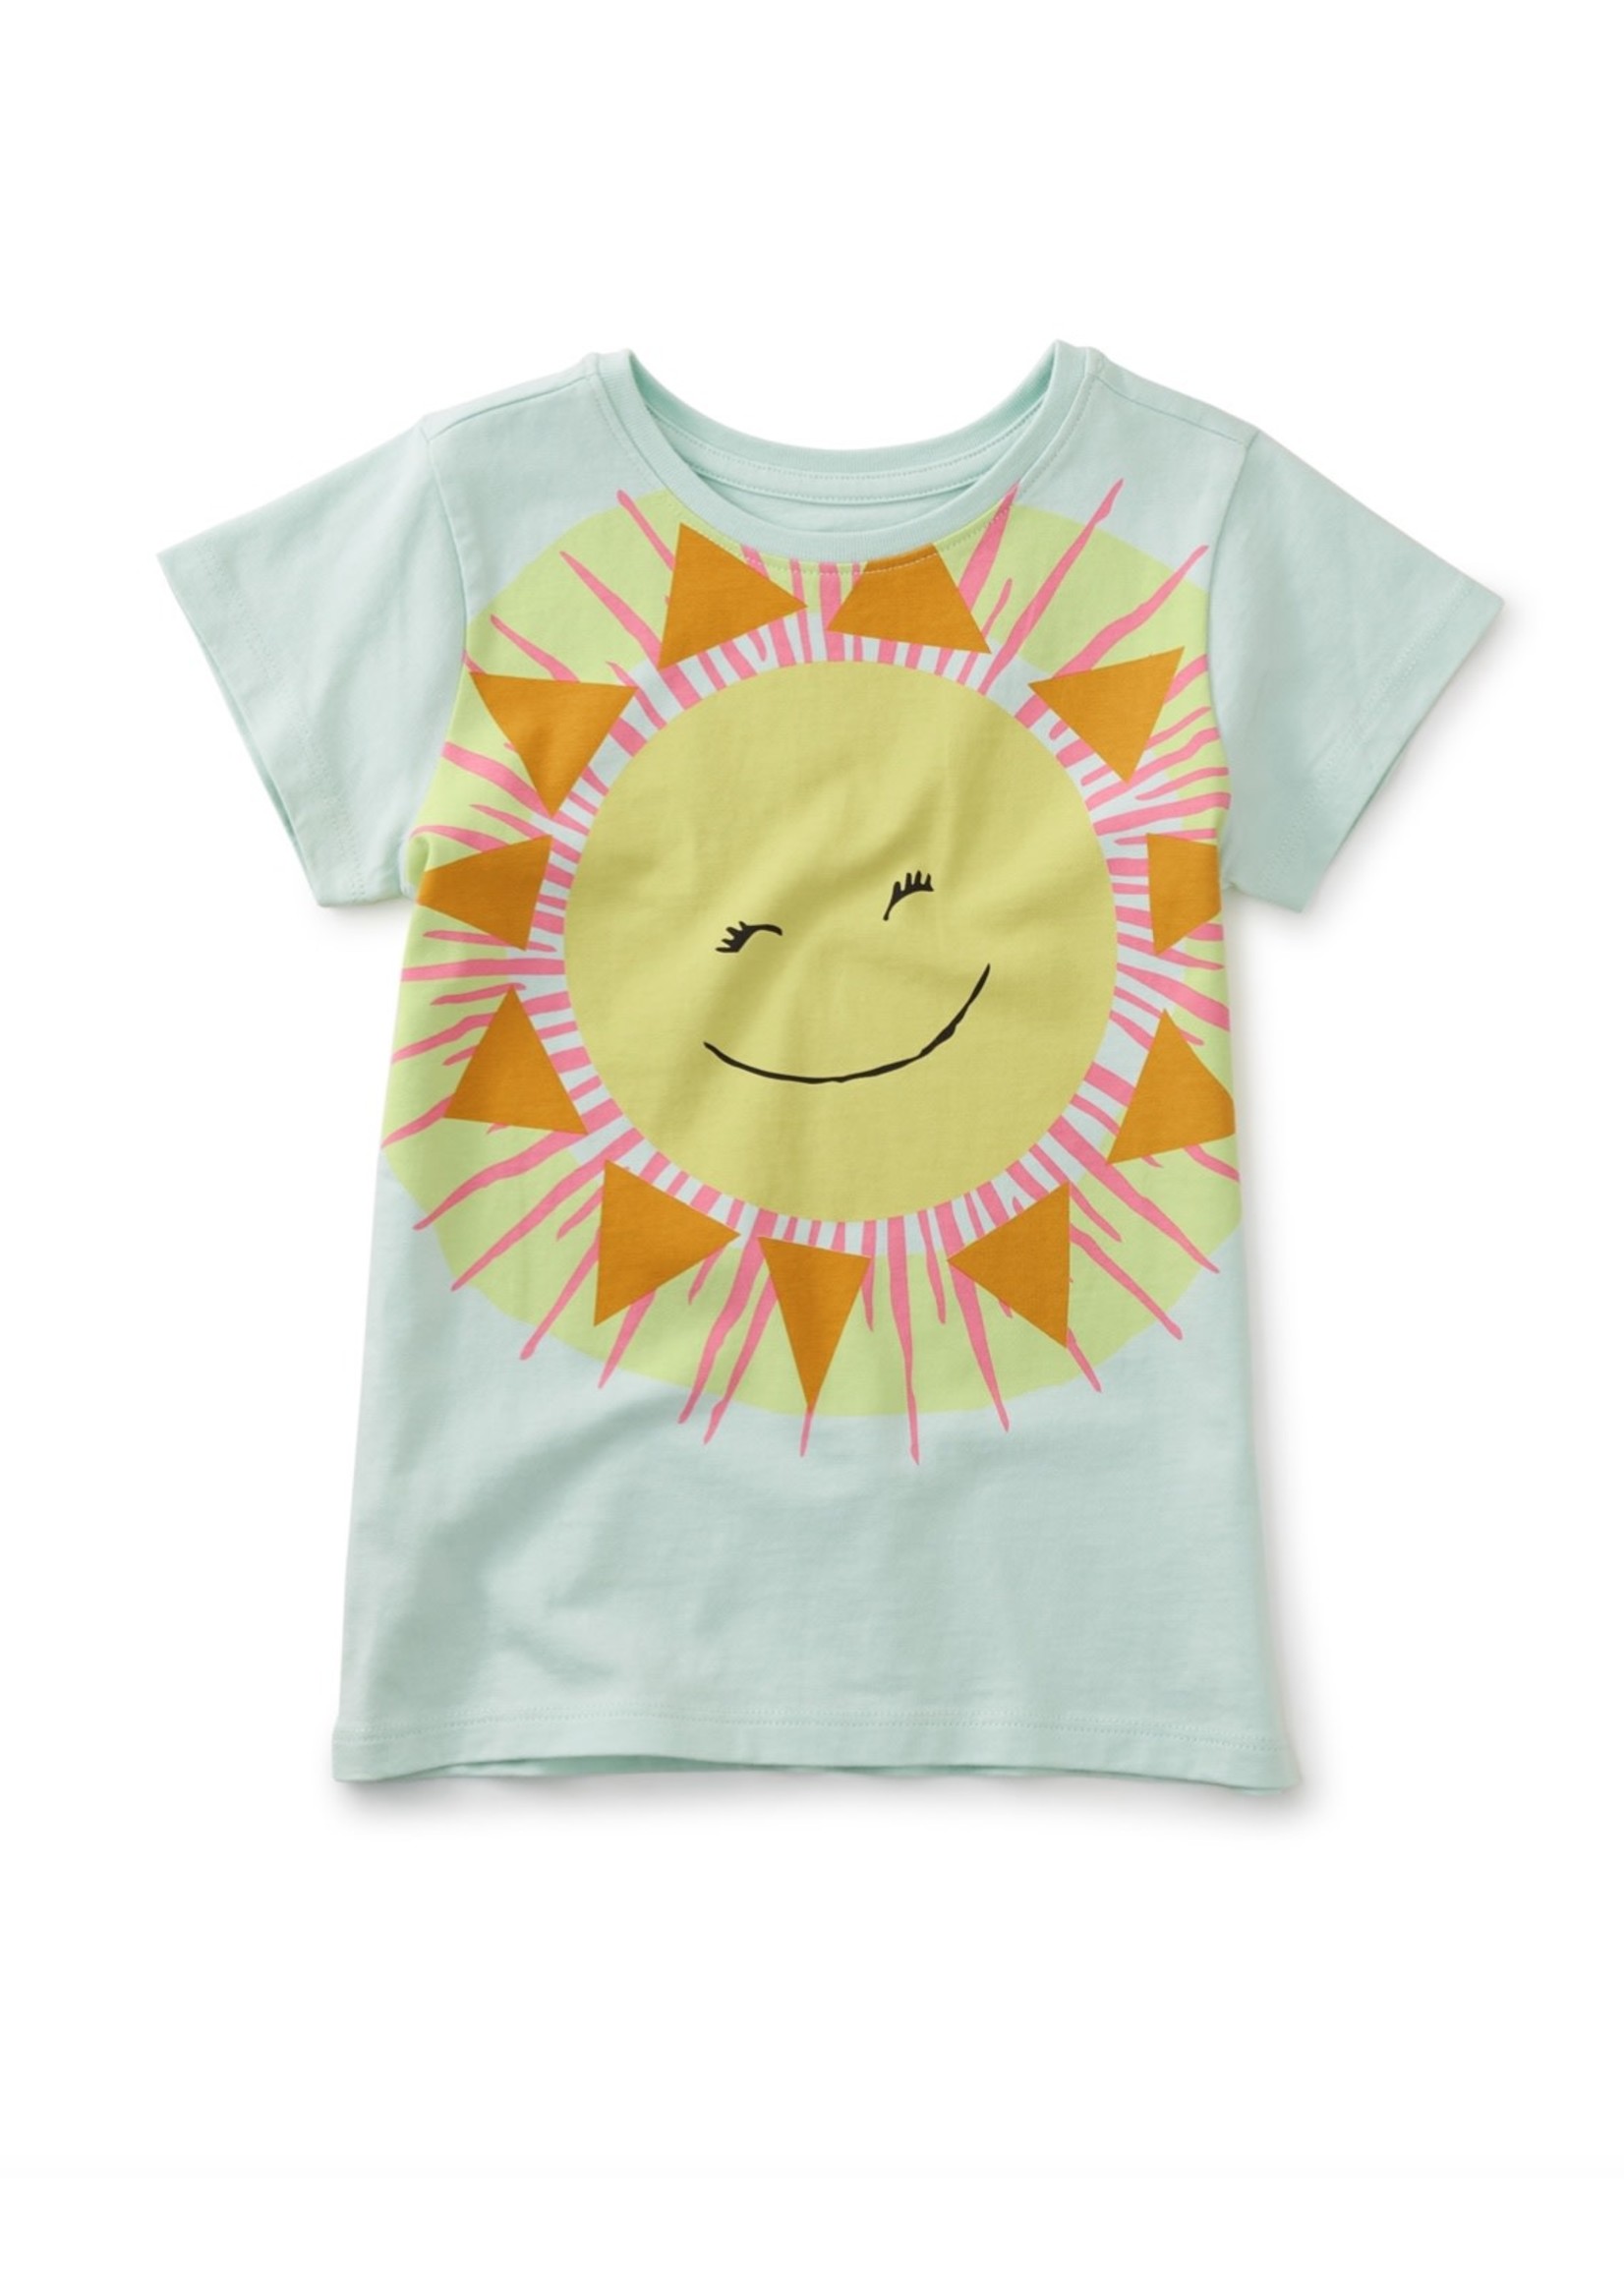 Tea Collection Tea Collection, Mostly Sunny Graphic Tee in Garden Party